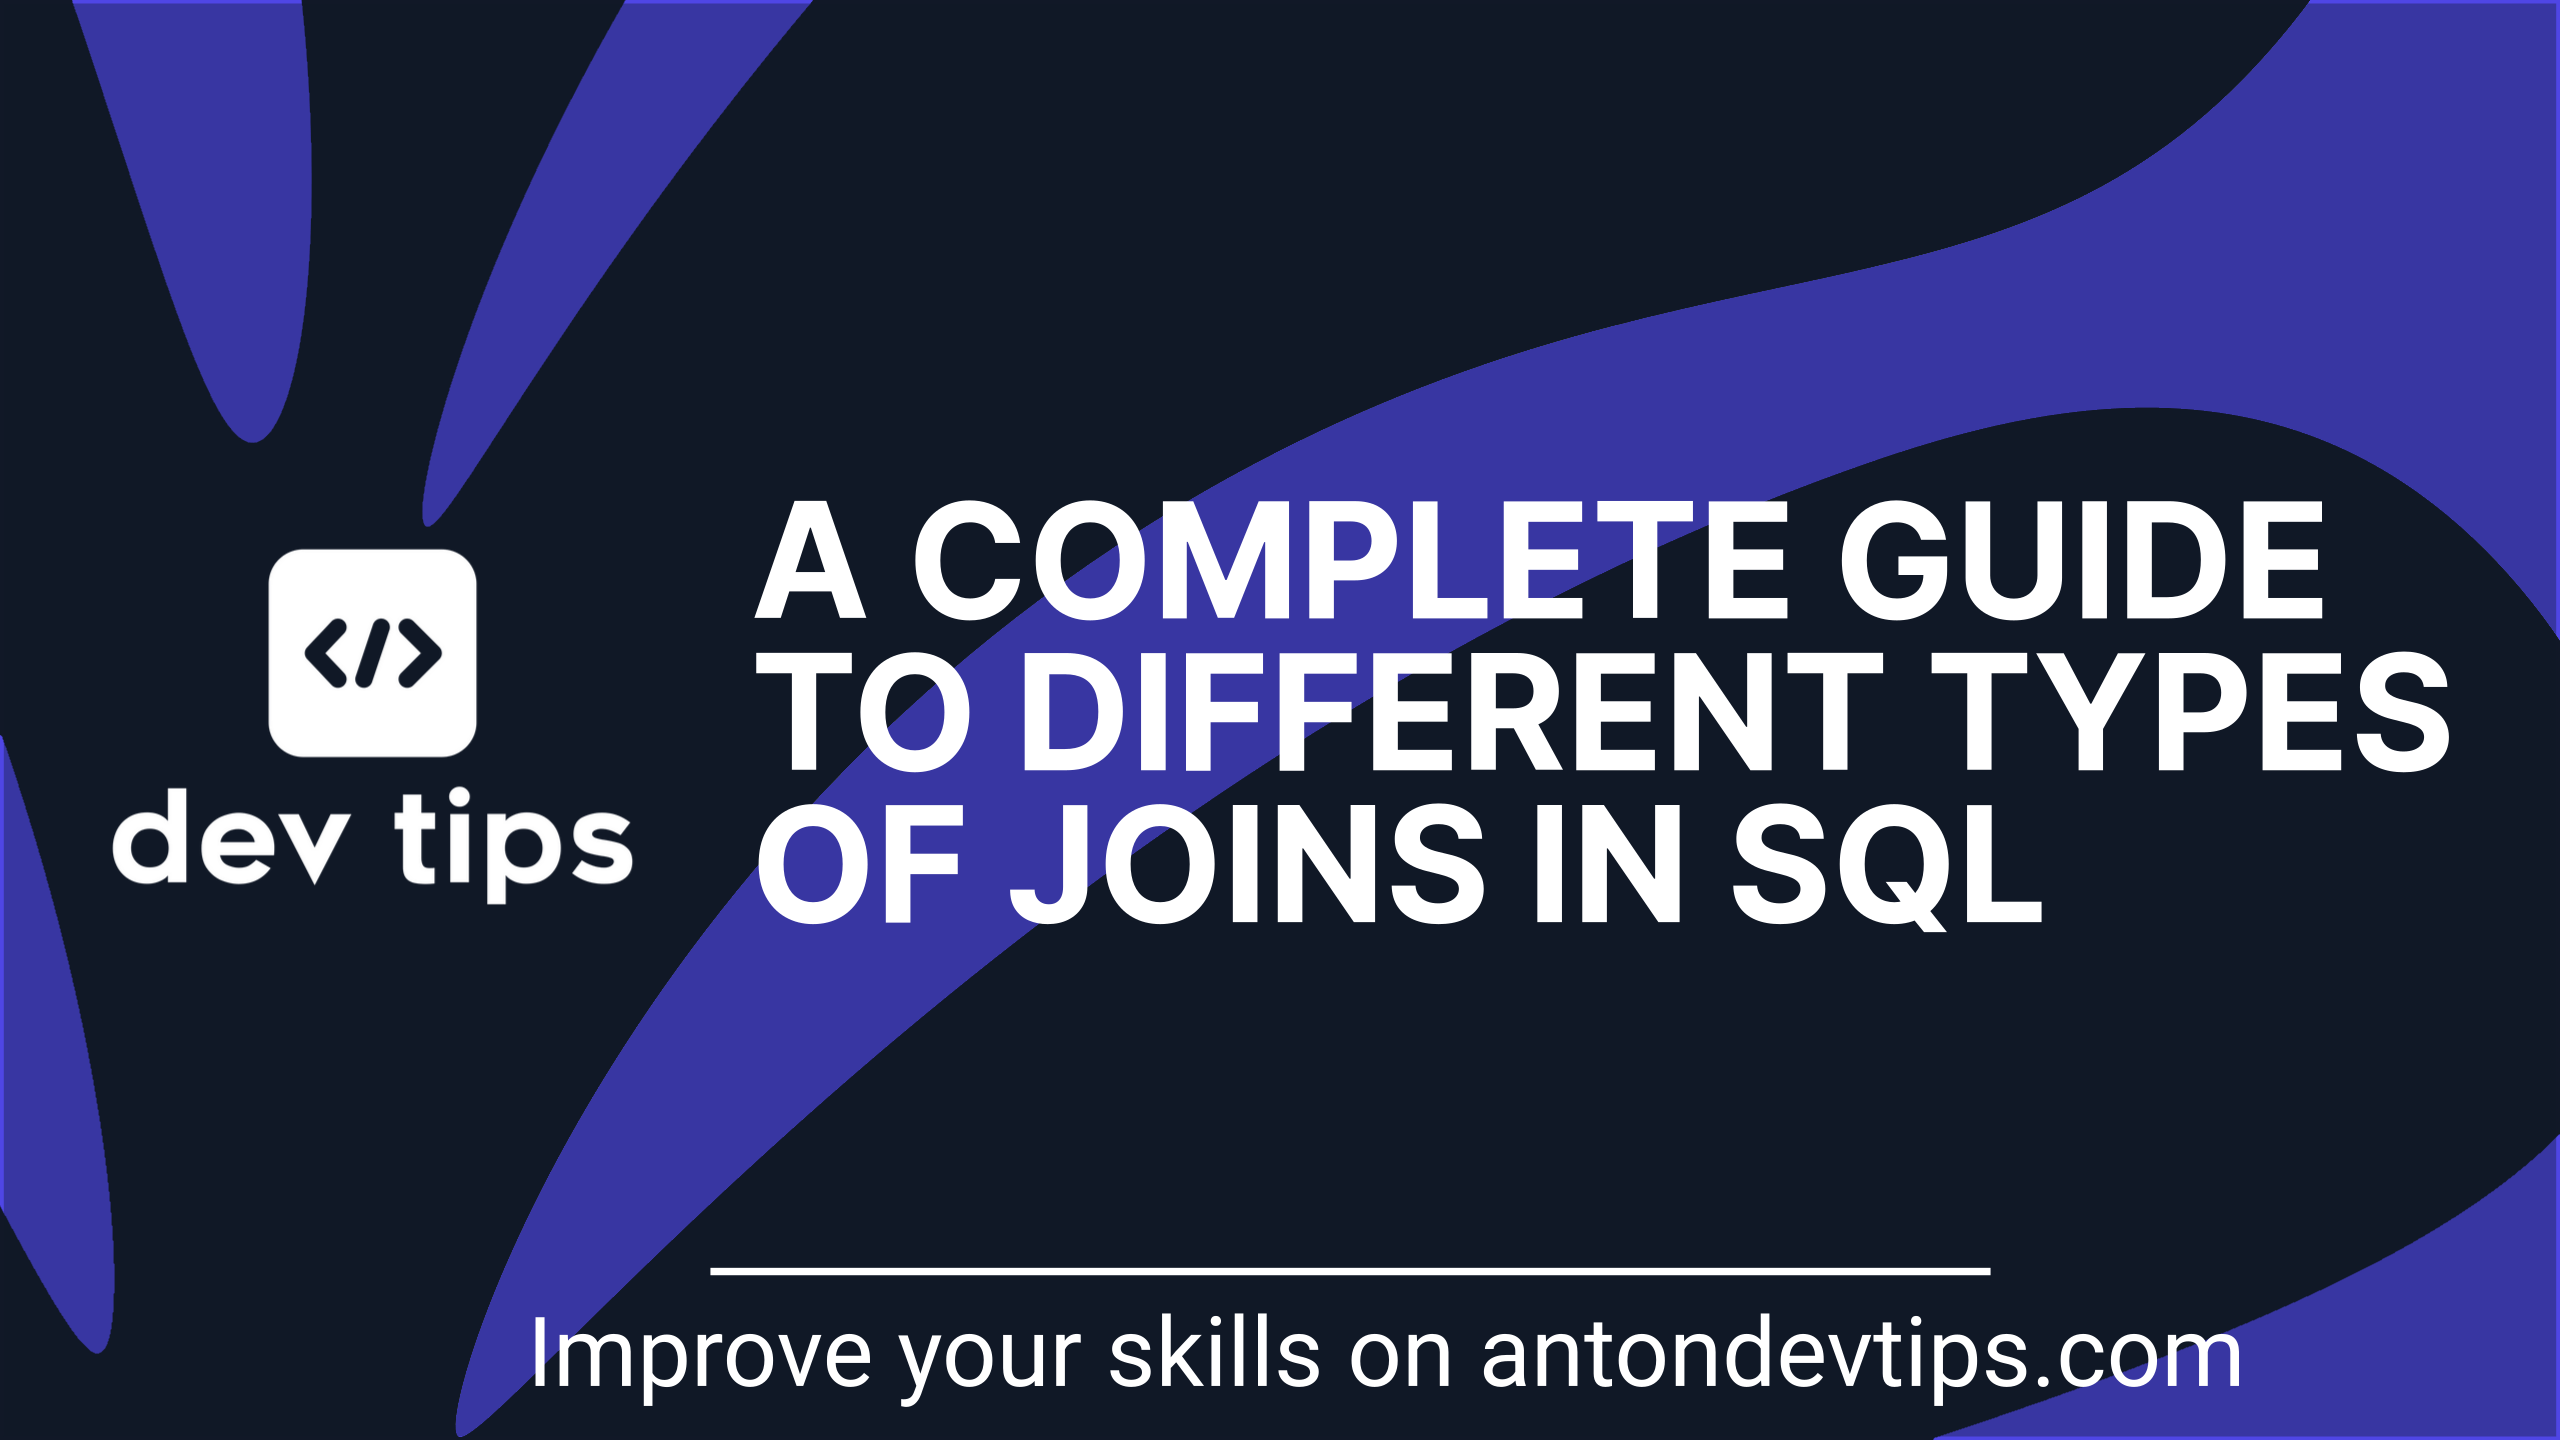 A Complete Guide to Different Types of Joins in SQL